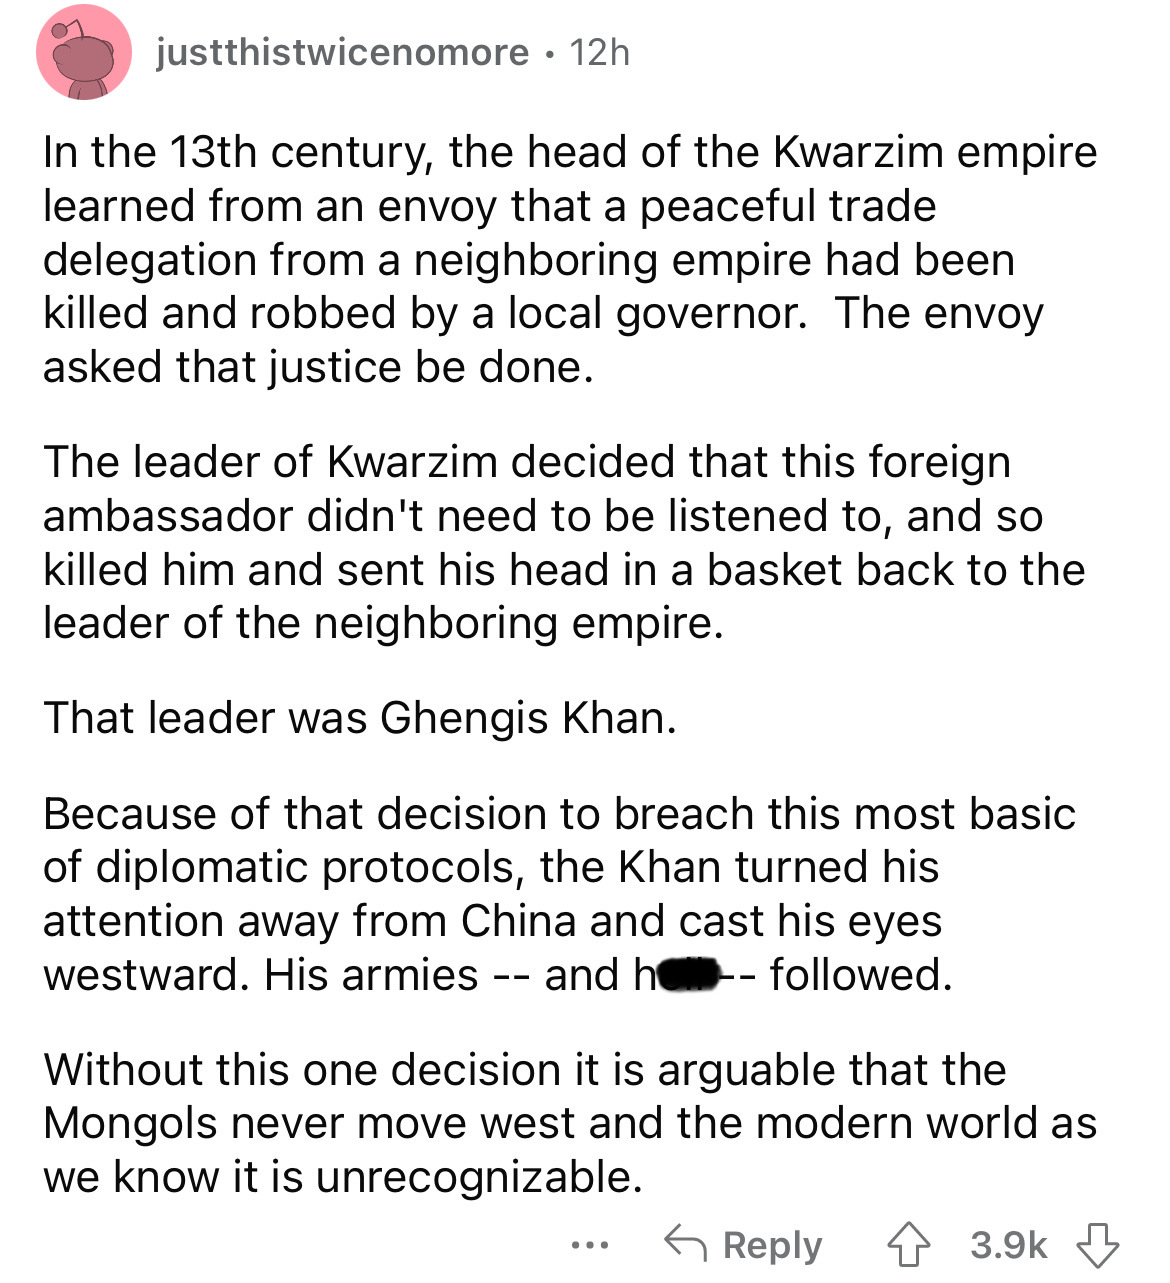 document - justthistwicenomore 12h . In the 13th century, the head of the Kwarzim empire learned from an envoy that a peaceful trade delegation from a neighboring empire had been killed and robbed by a local governor. The envoy asked that justice be done.